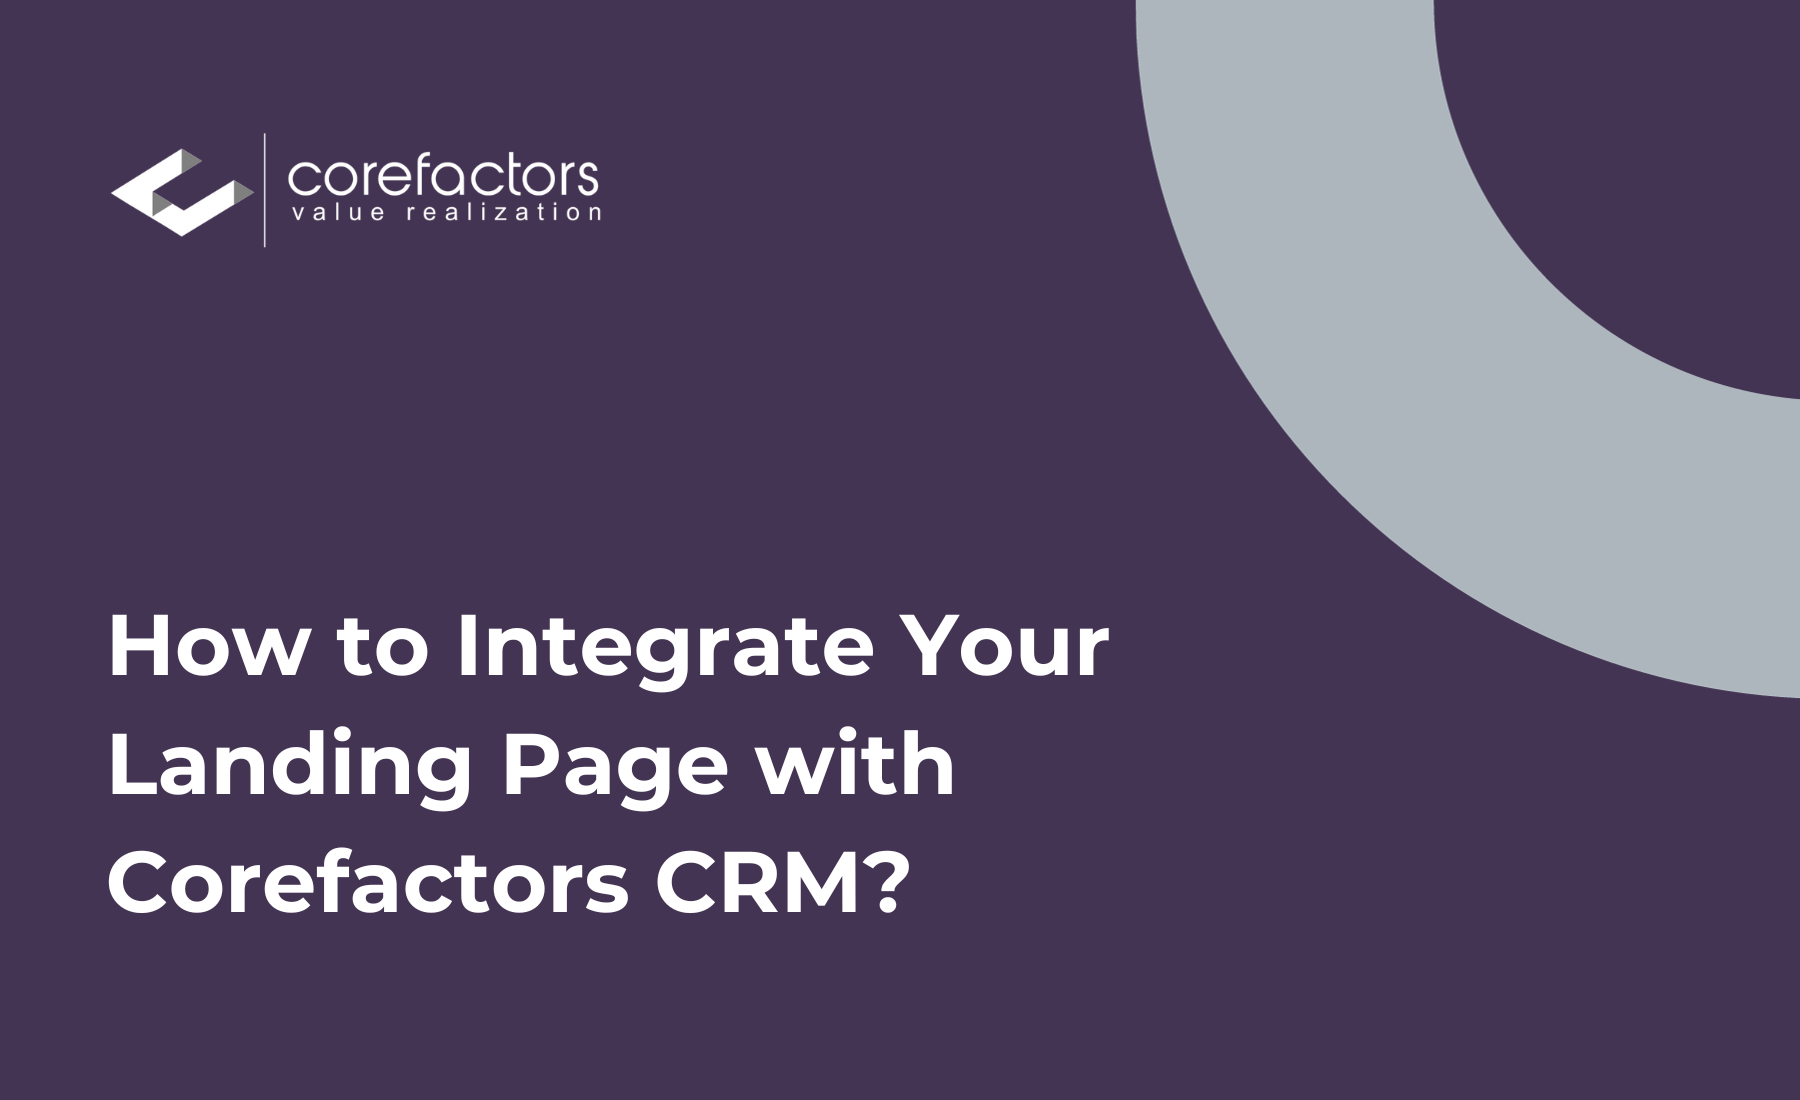 How to integrate your landing page with Corefactors CRM?